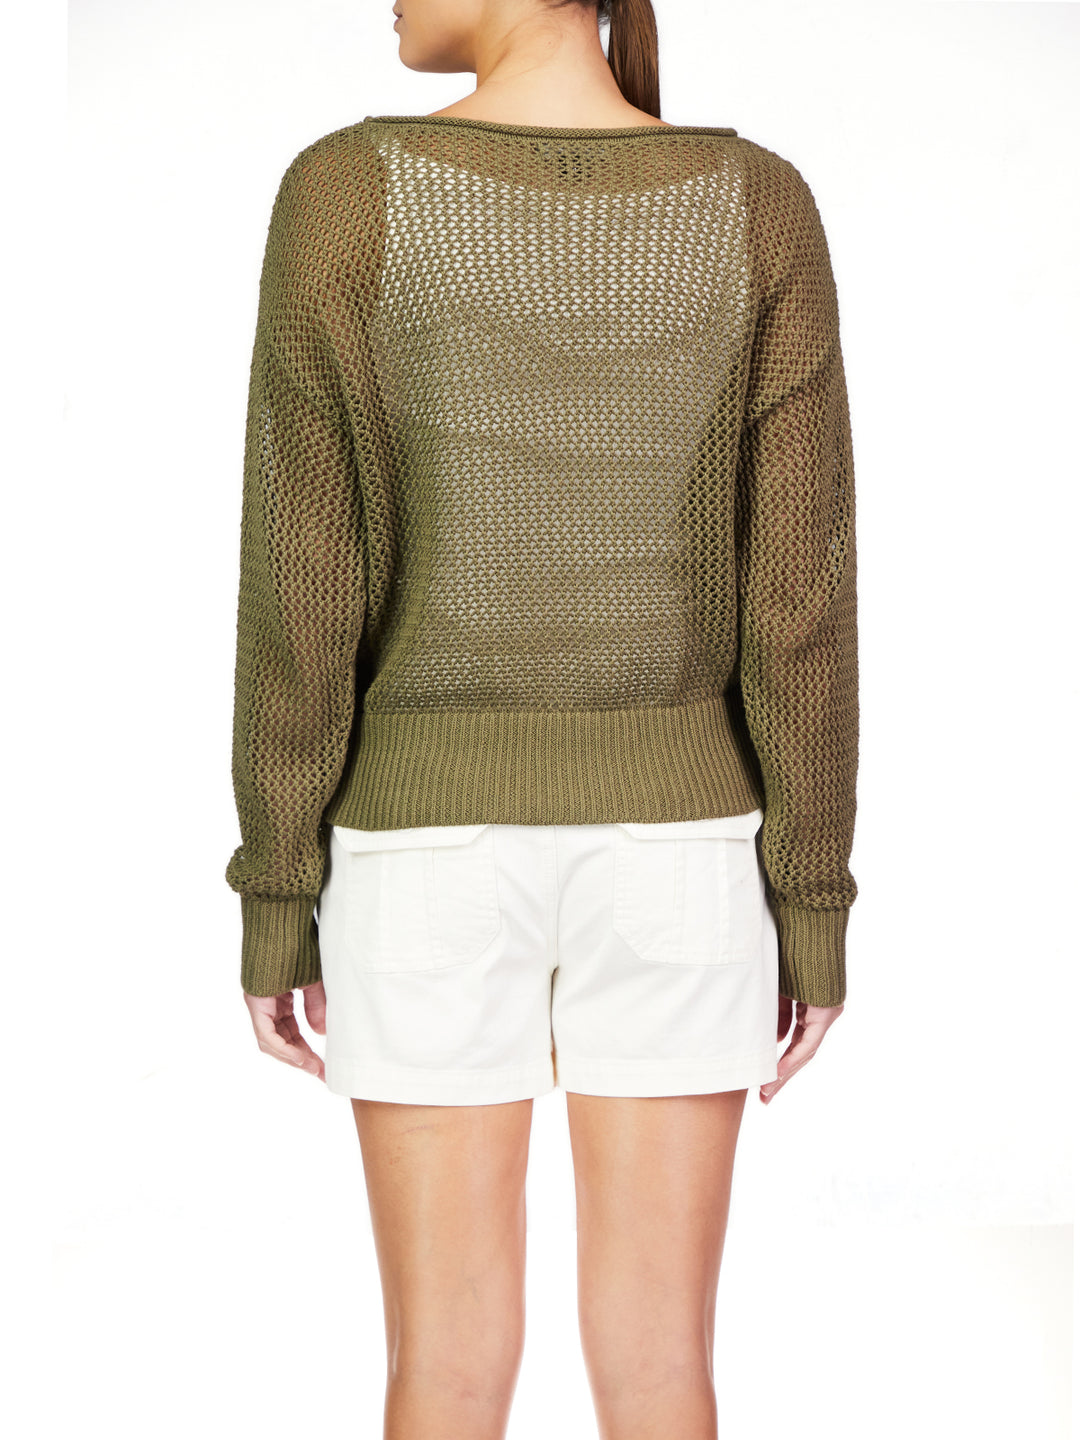 OPEN KNIT SWEATER-BURNT OLIVE - Kingfisher Road - Online Boutique